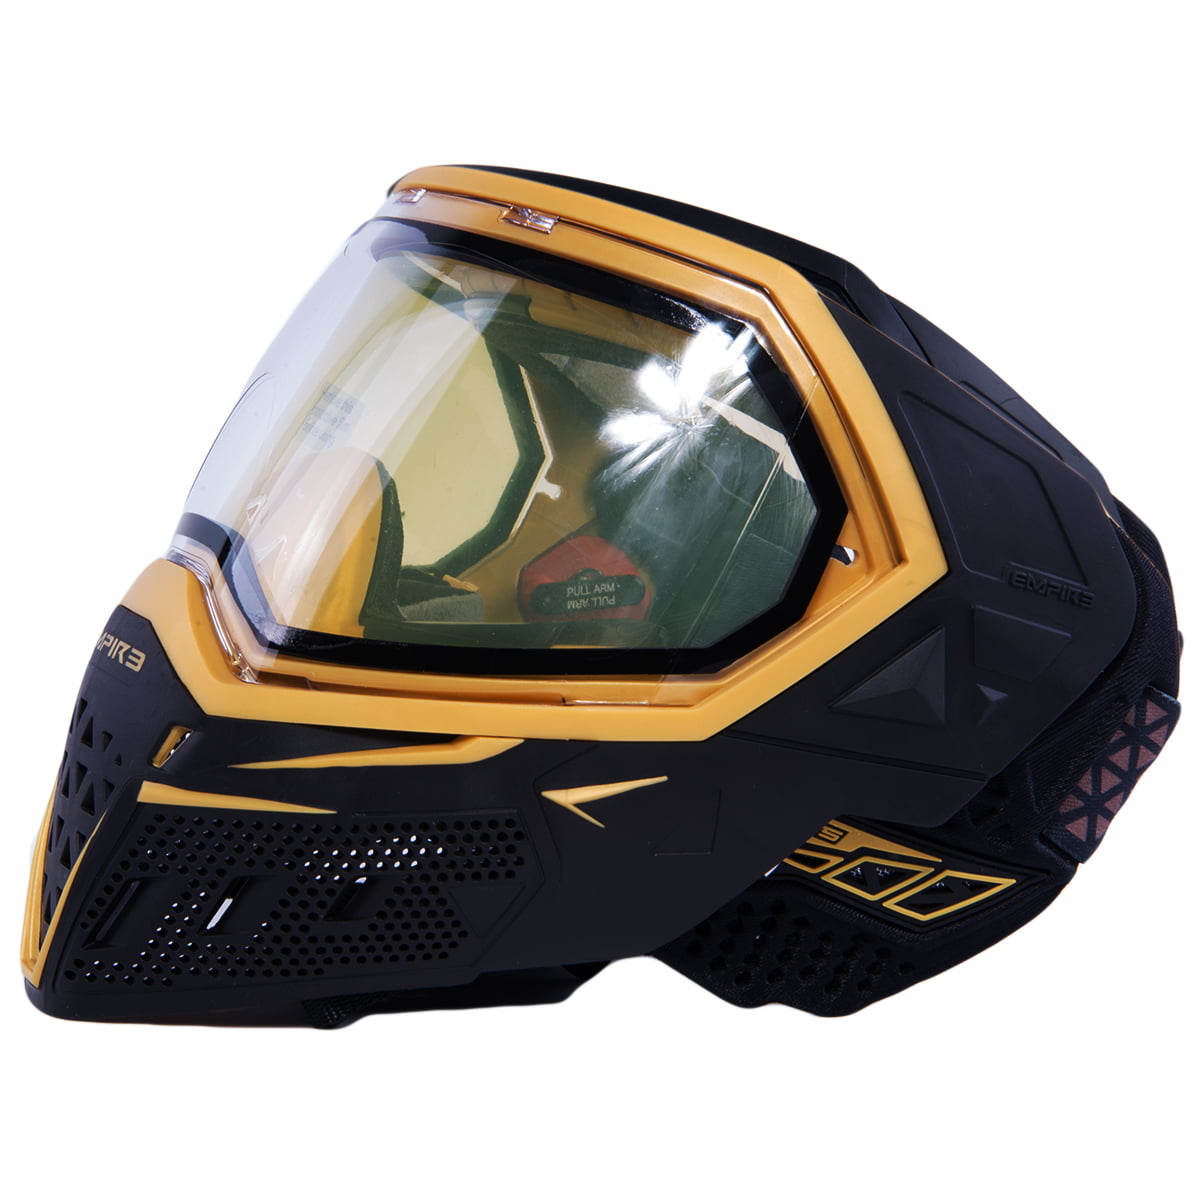 Empire EVS Thermal Paintball Goggle Mask Black Gold With Smoke and Clear Lenses for sale online 